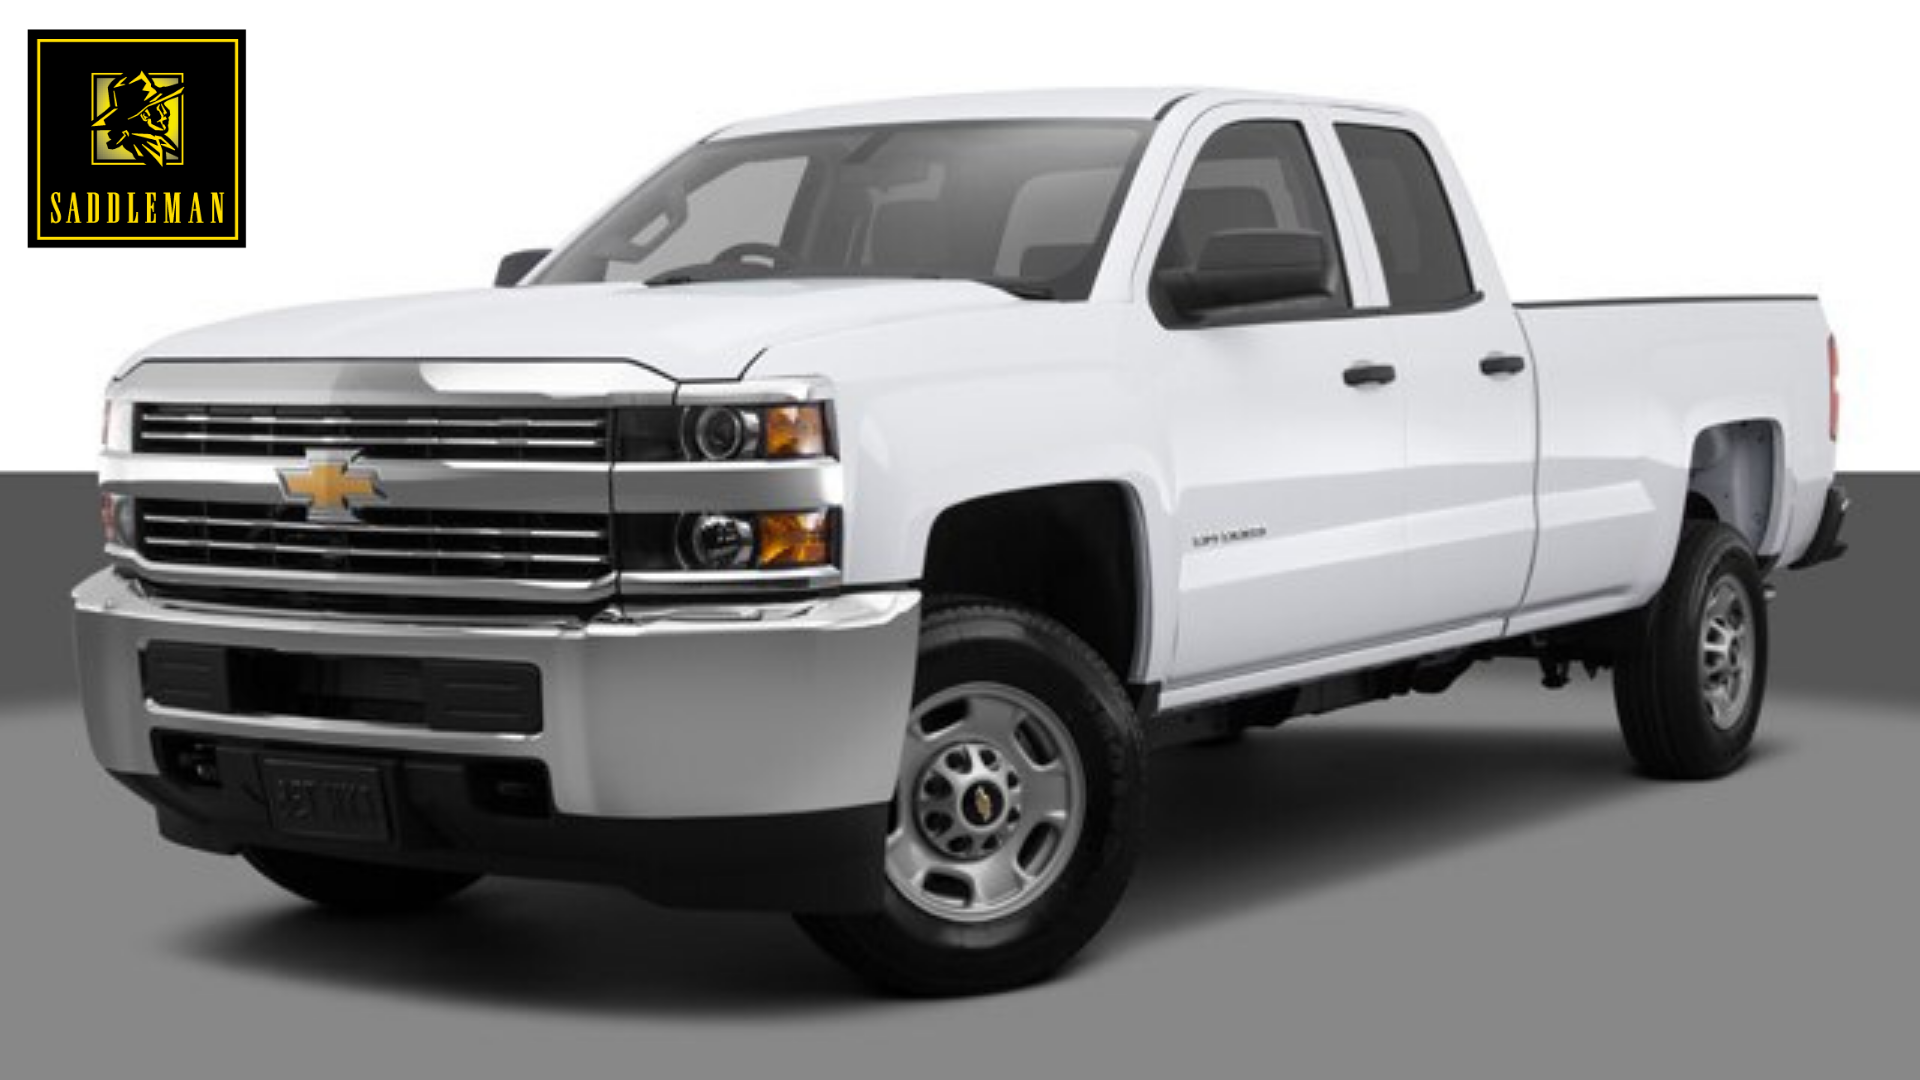 2015 Chevrolet Silverado 3500 Custom Fitted Seat Covers | Saddleman